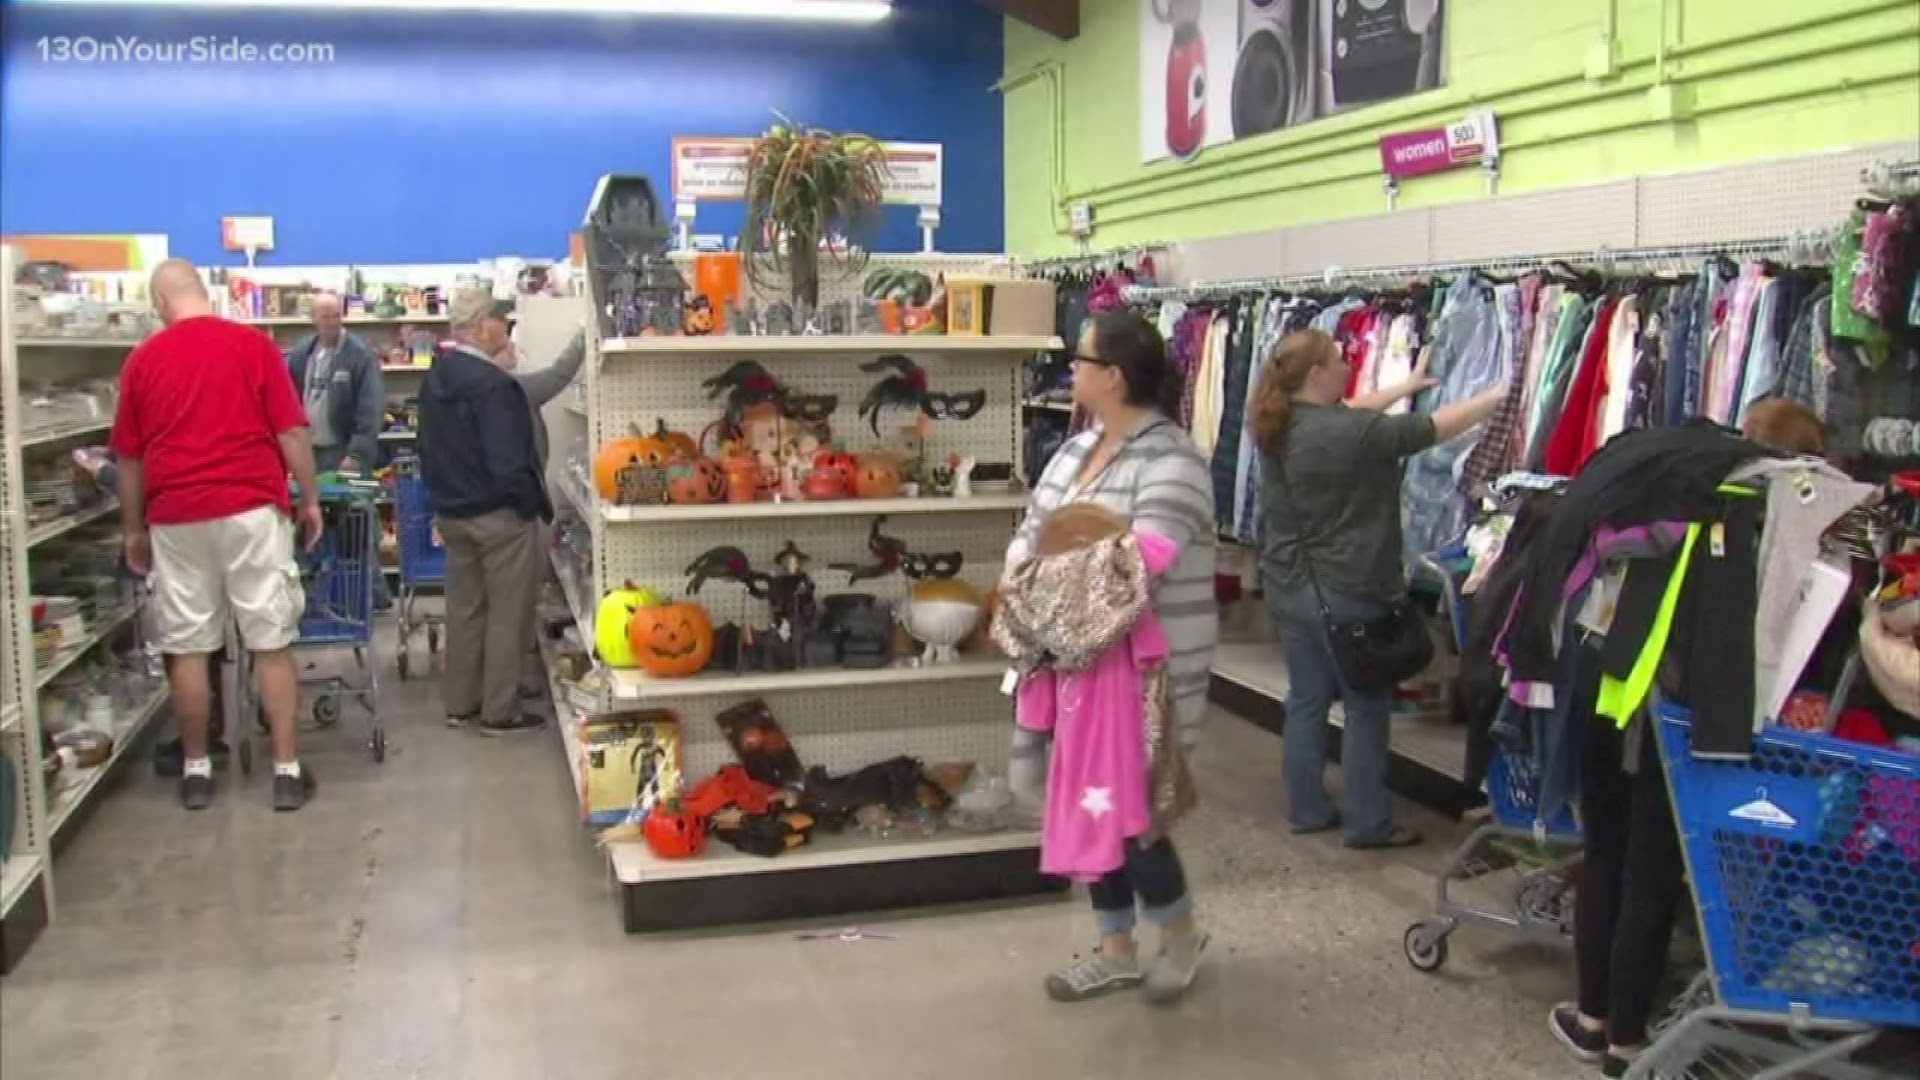 All 19 Goodwill stores in Grand Rapids will be closed by the end of the work day Monday until April 13.